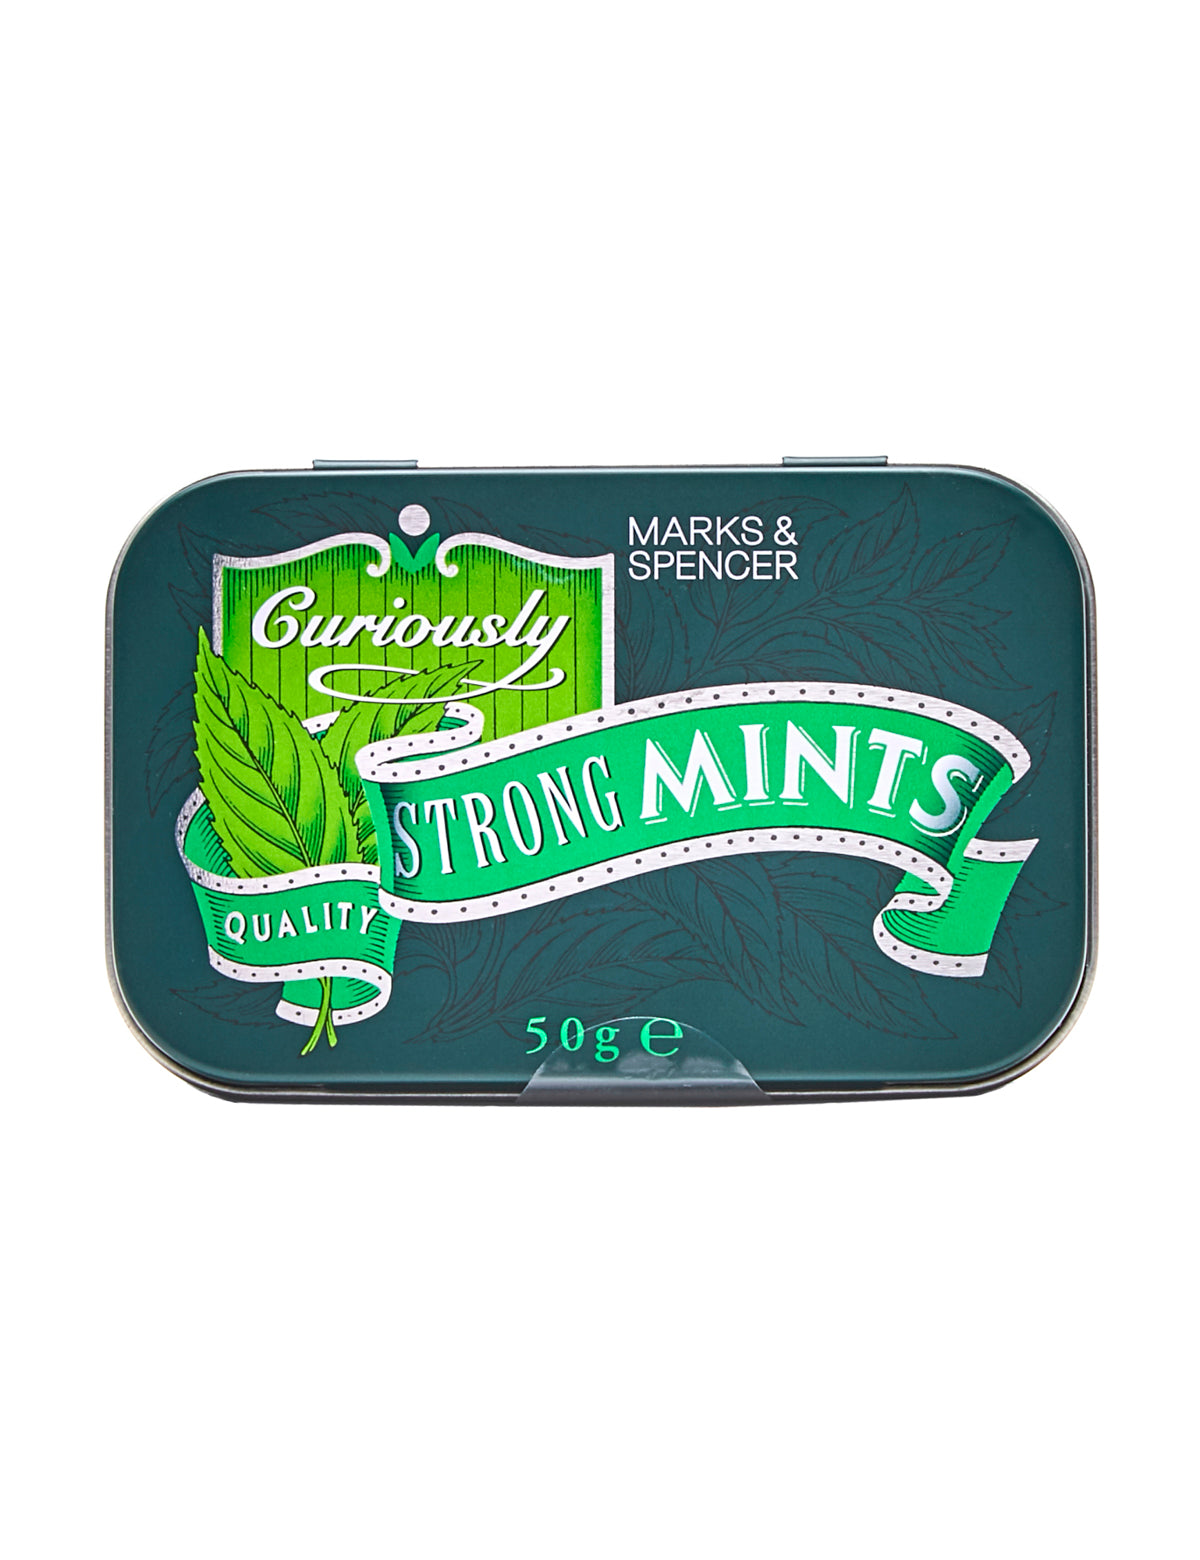 Curiously Strong Mints Marks & Spencer Philippines